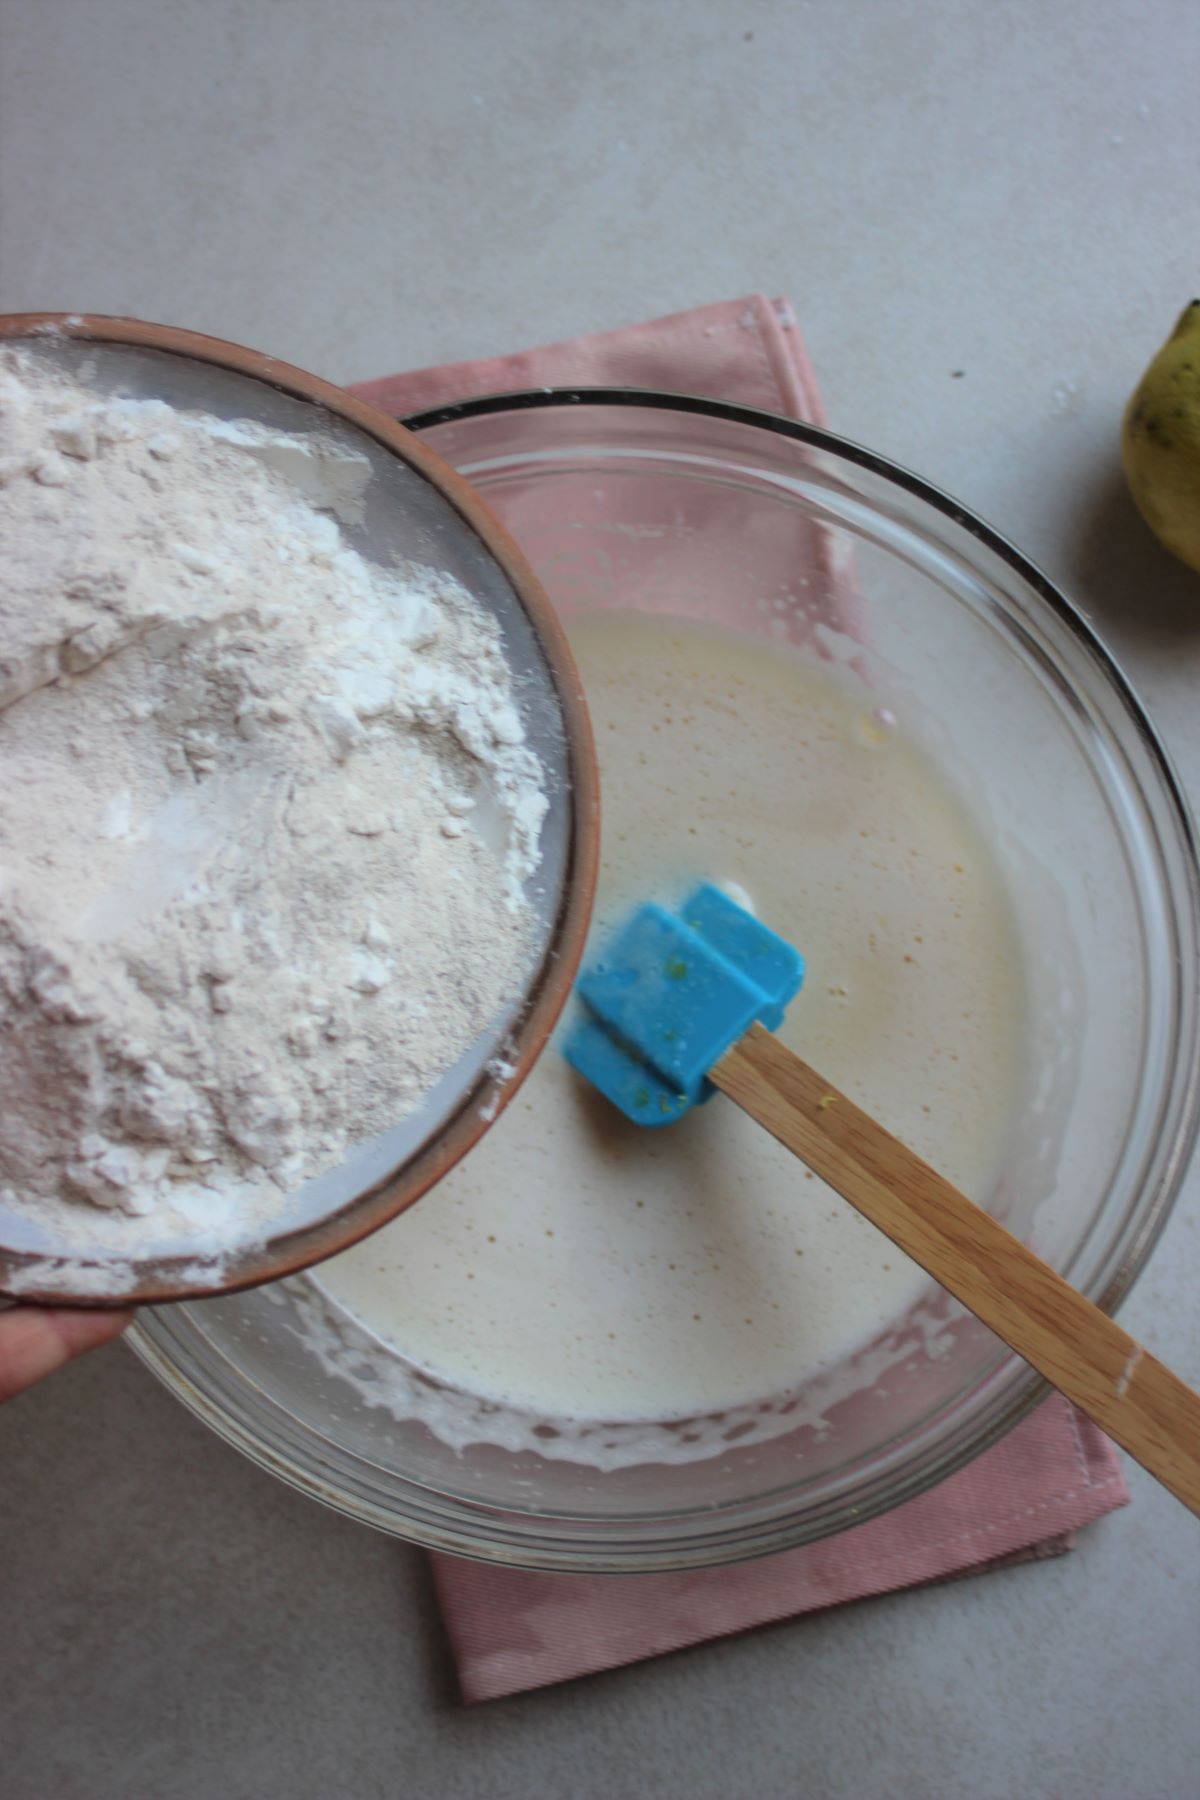 Plate with flour is about to be poured into a glass bowl with a liquid mixture and a rubber spatula.